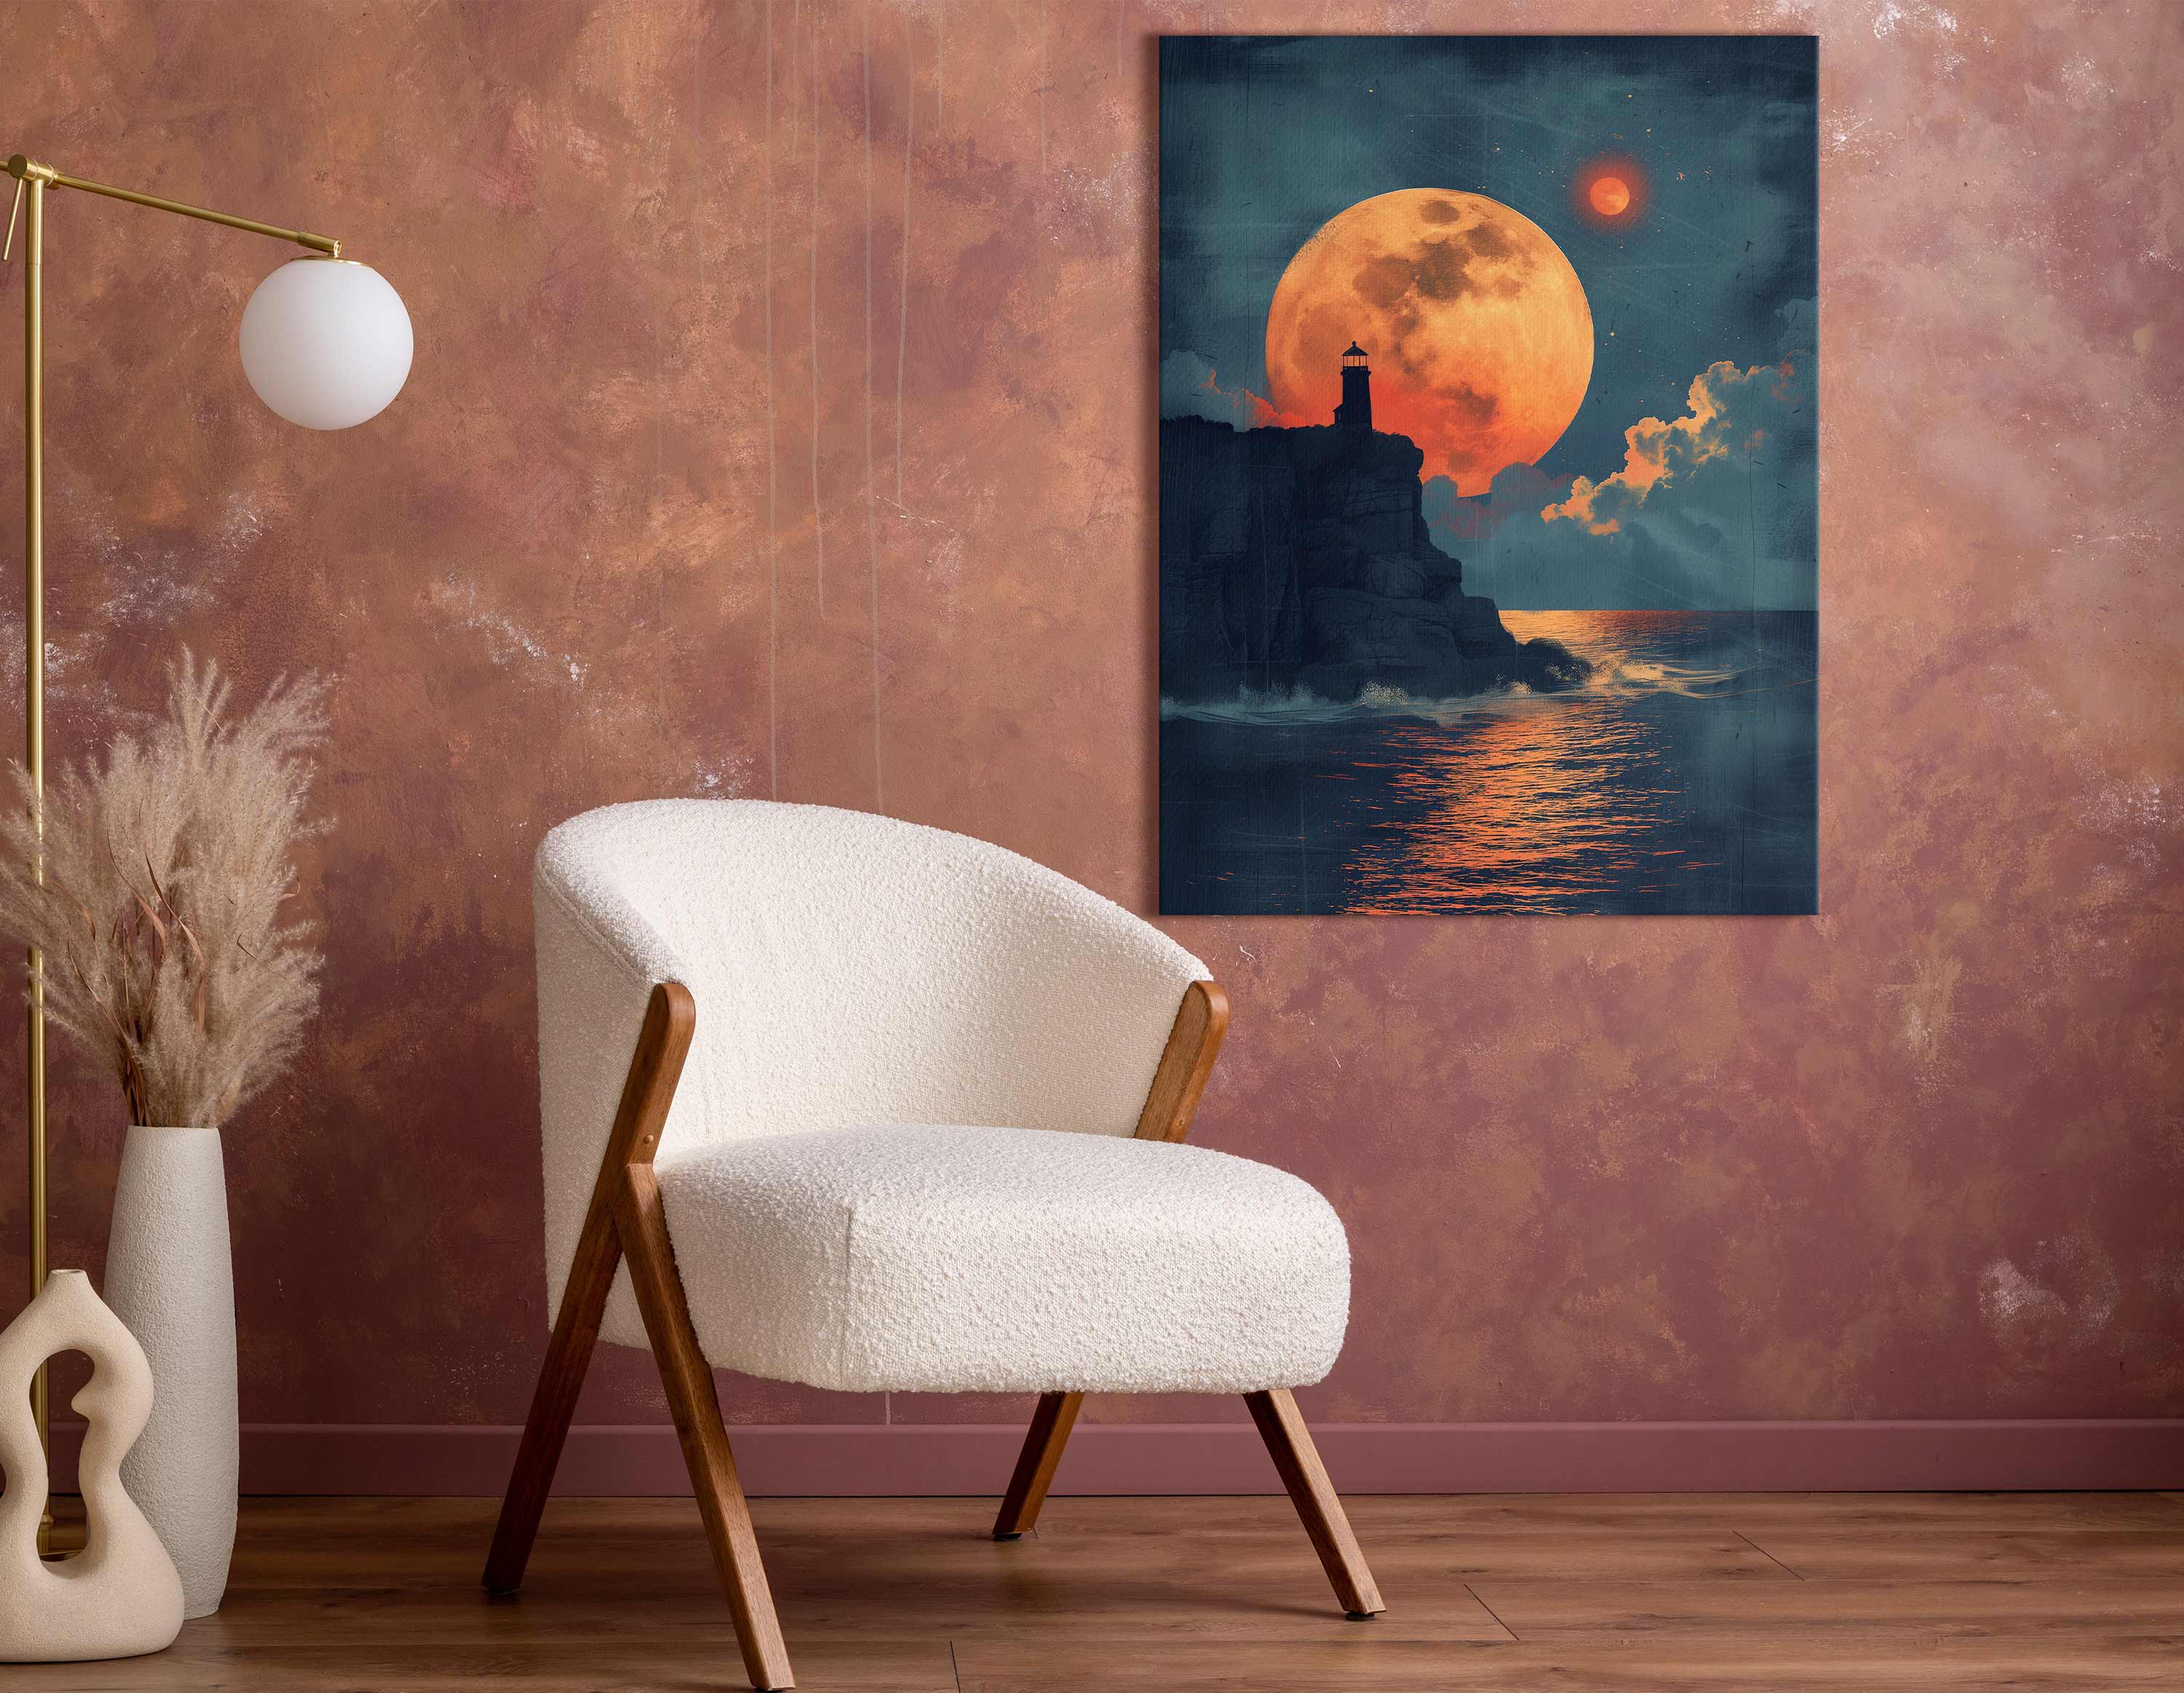    Moon Over Cliff Wall Print